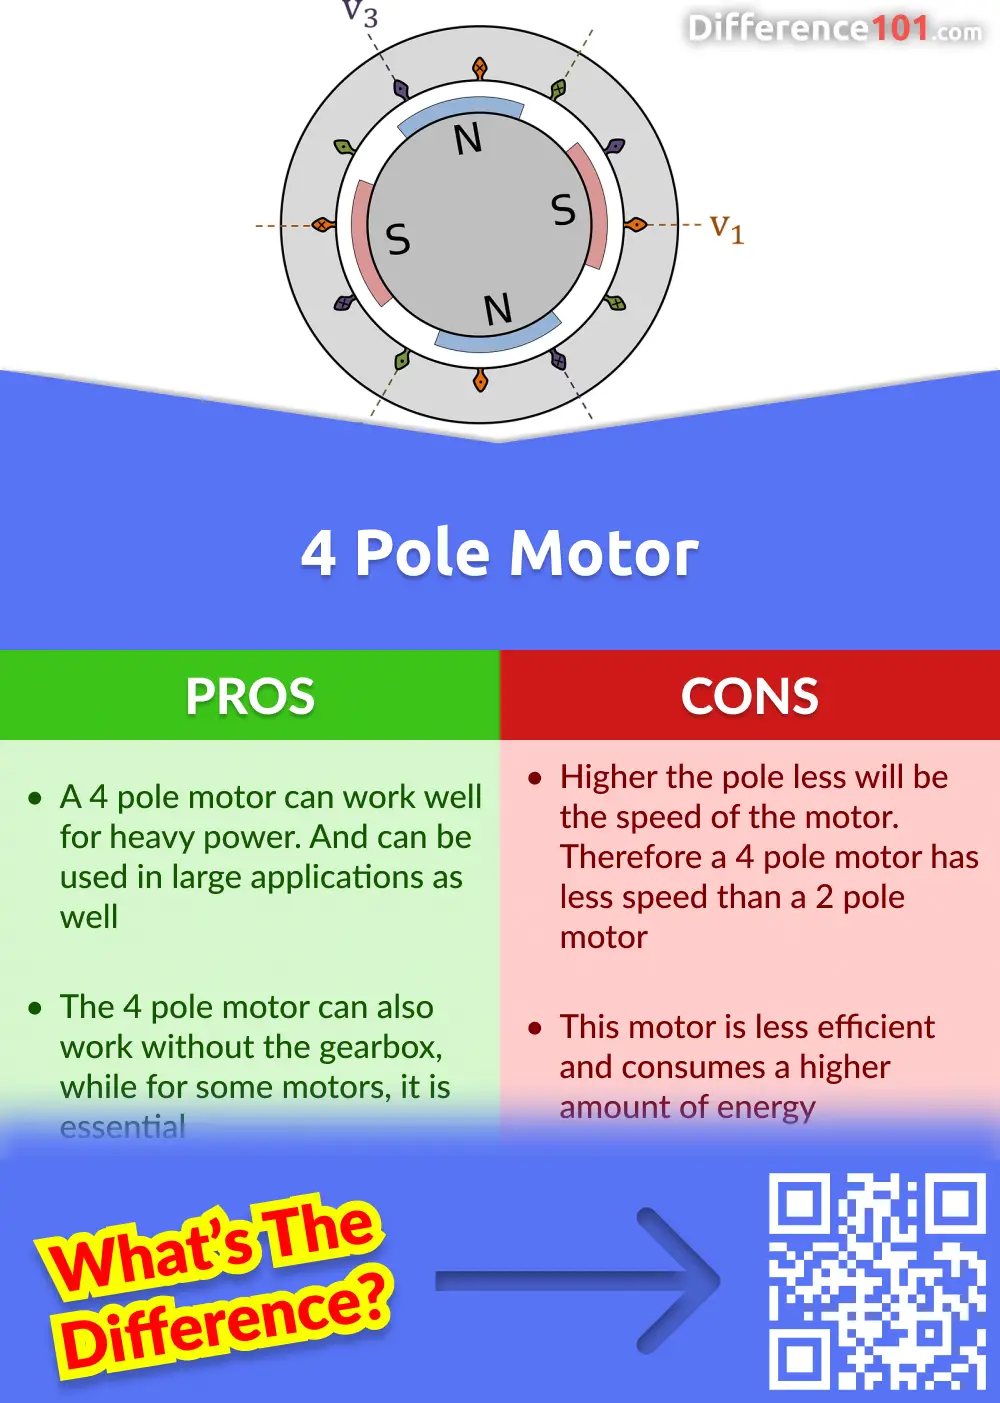 4 Pole Motor Pros and Cons